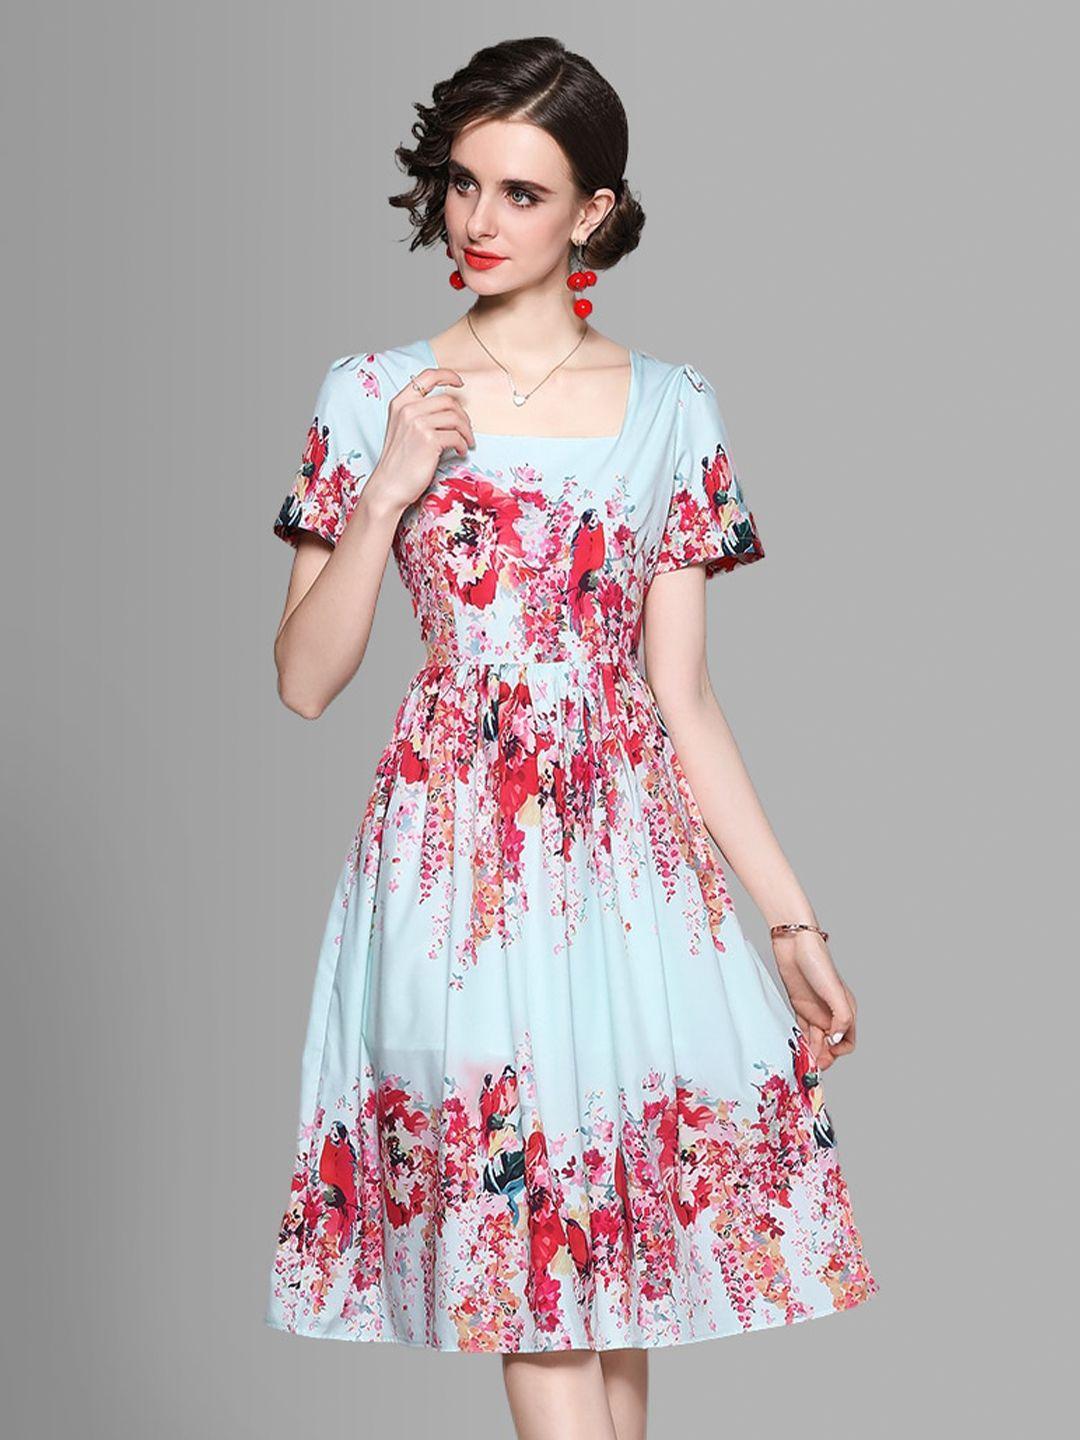 jc collection blue & red floral dress